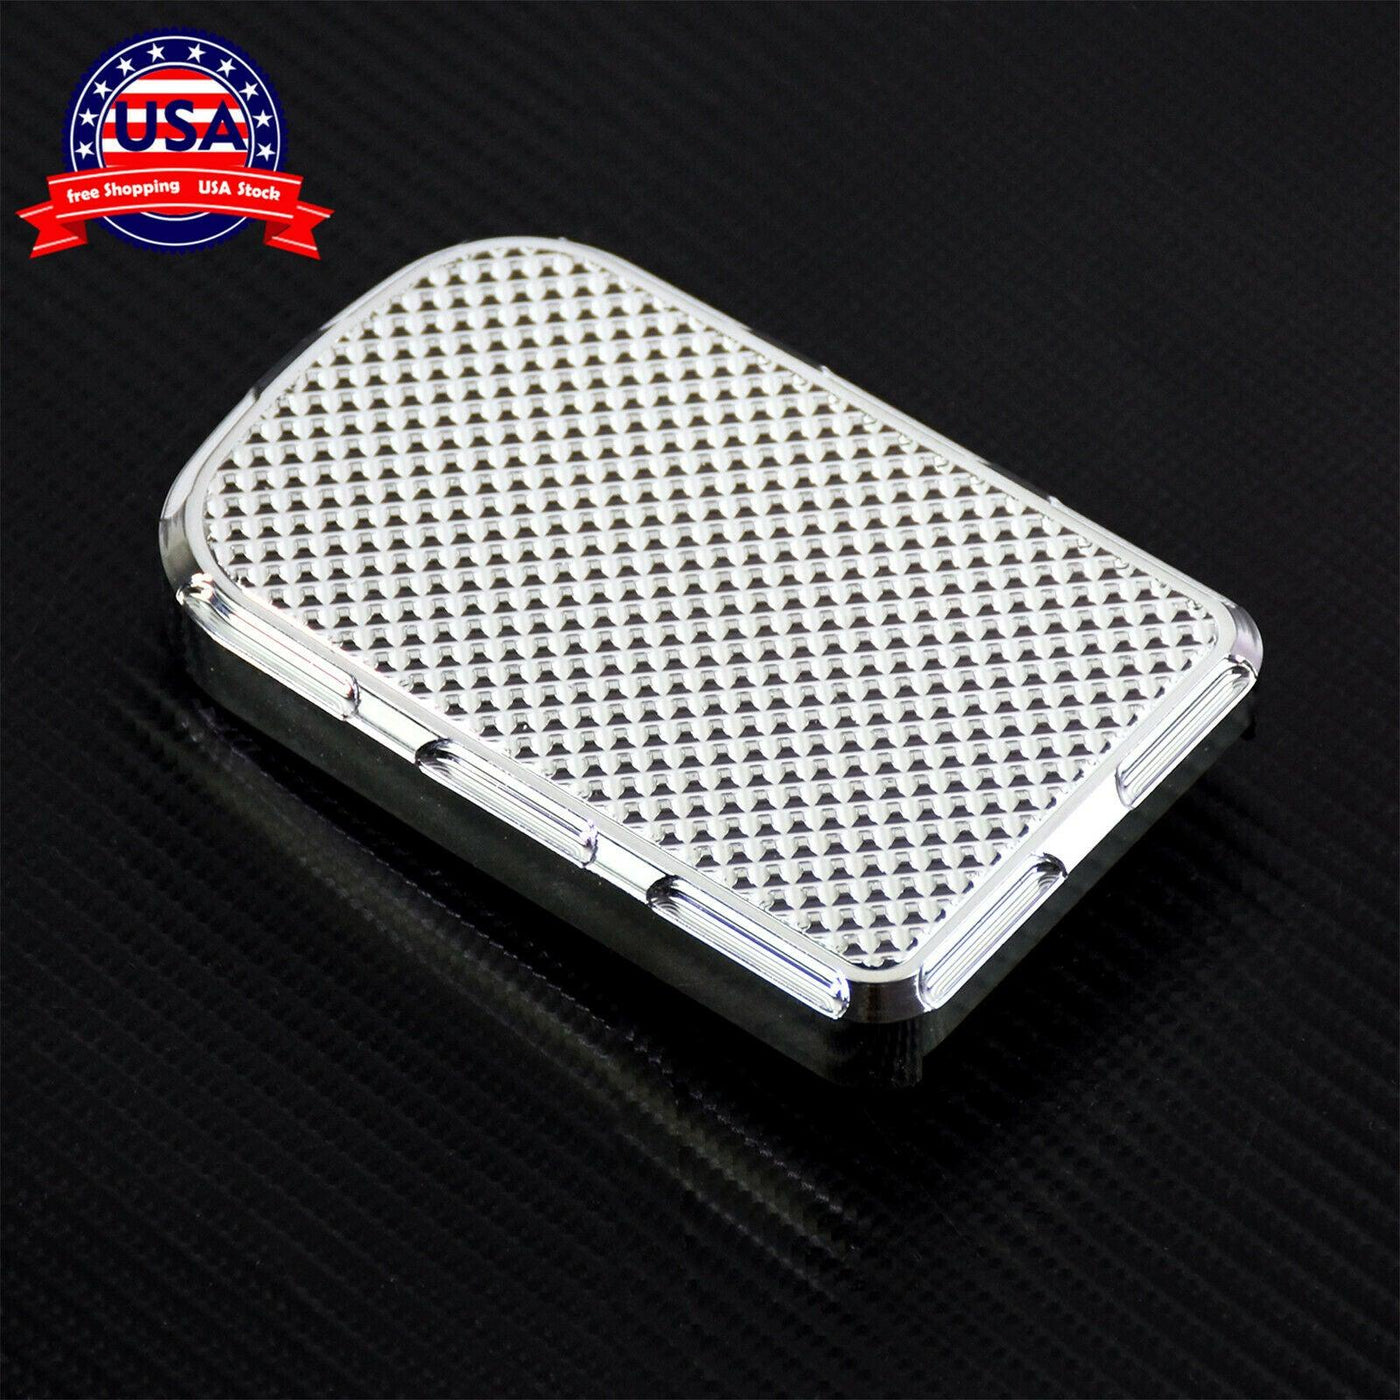 Chrome Brake Pedal Pad Cover Fit For Harley Touring FLHT Softail Dyna Tri Glide - Moto Life Products